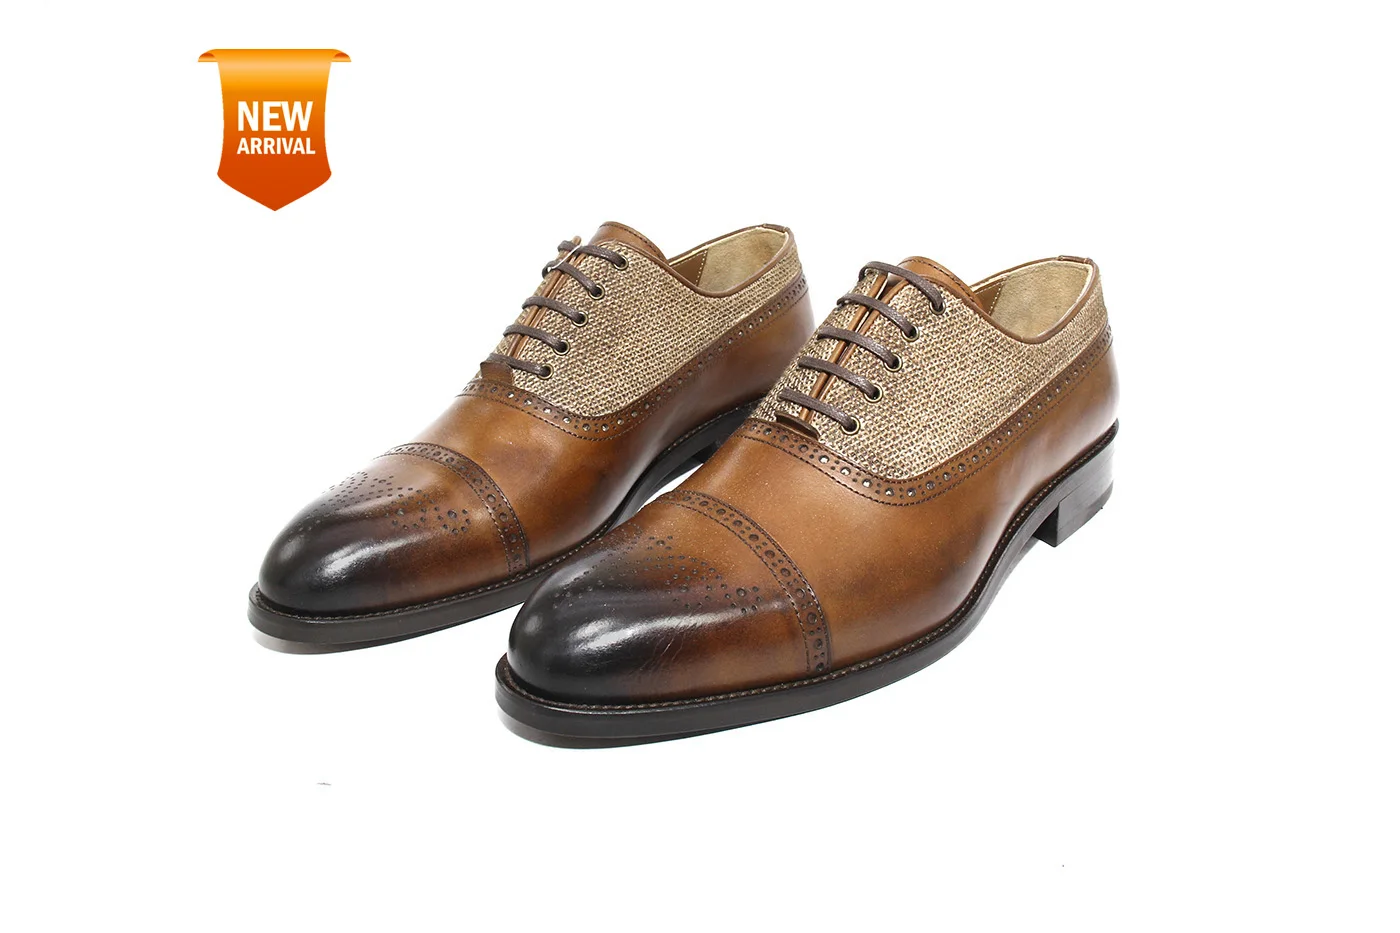 

Handmade Cap Toe Spectator Oxford Shoes with Tobacco Real Calf Leather, Microlight Soles, Handmade Footwear, New Season, Spring